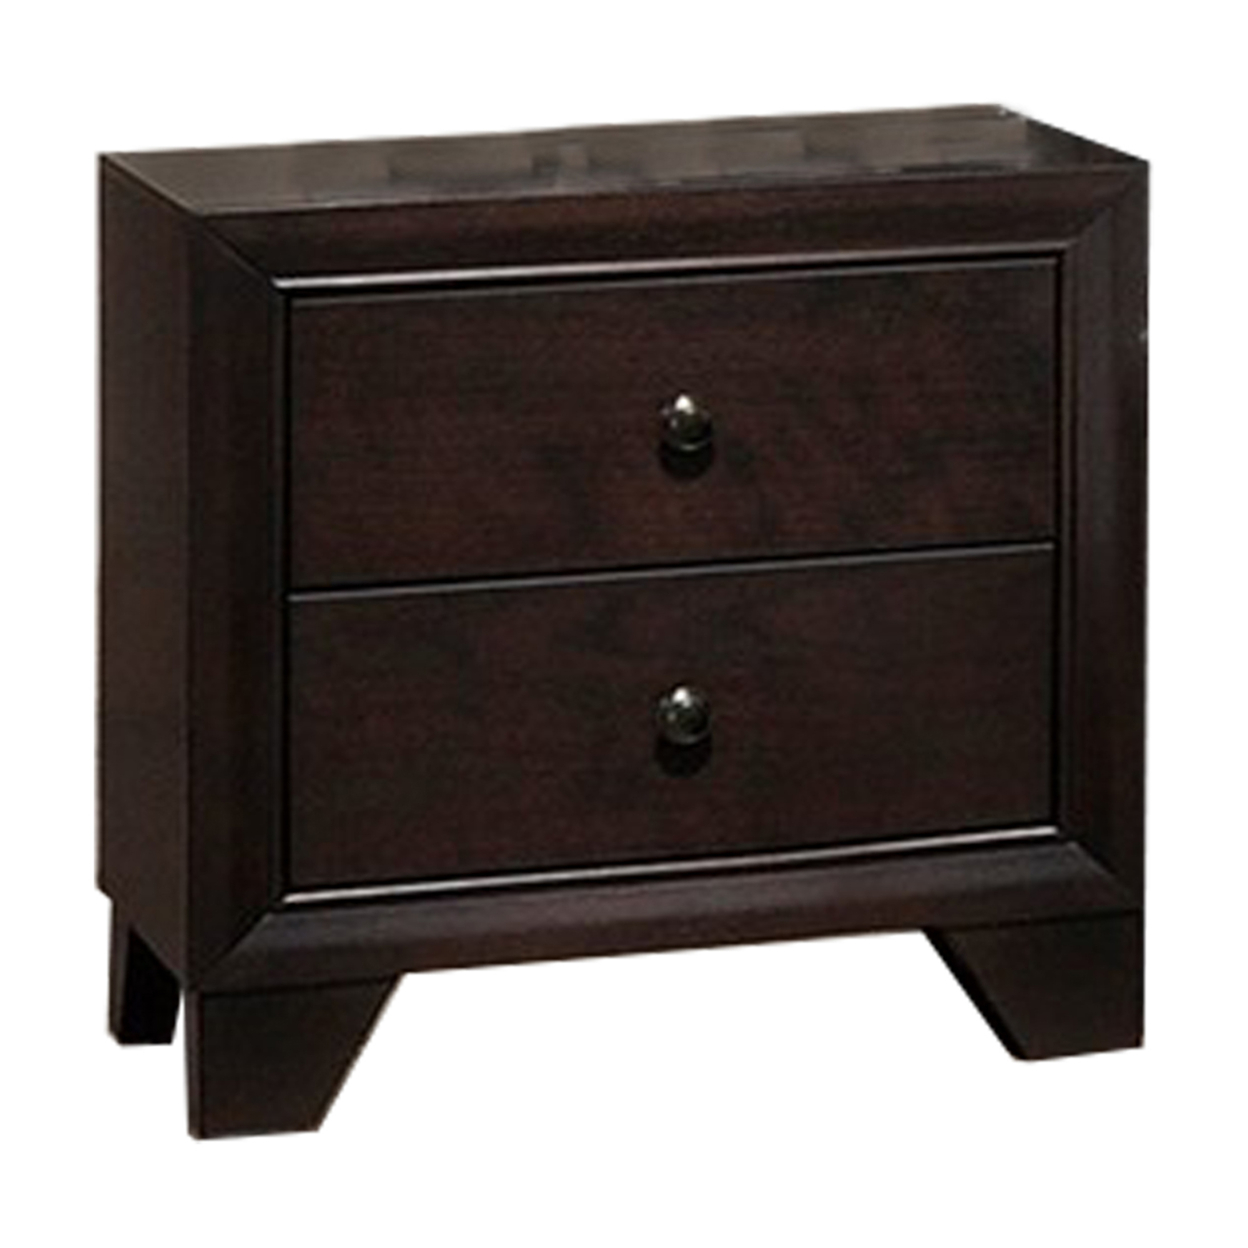 Transitional Wooden Nightstand With Two Spacious Drawers, Brown- Saltoro Sherpi